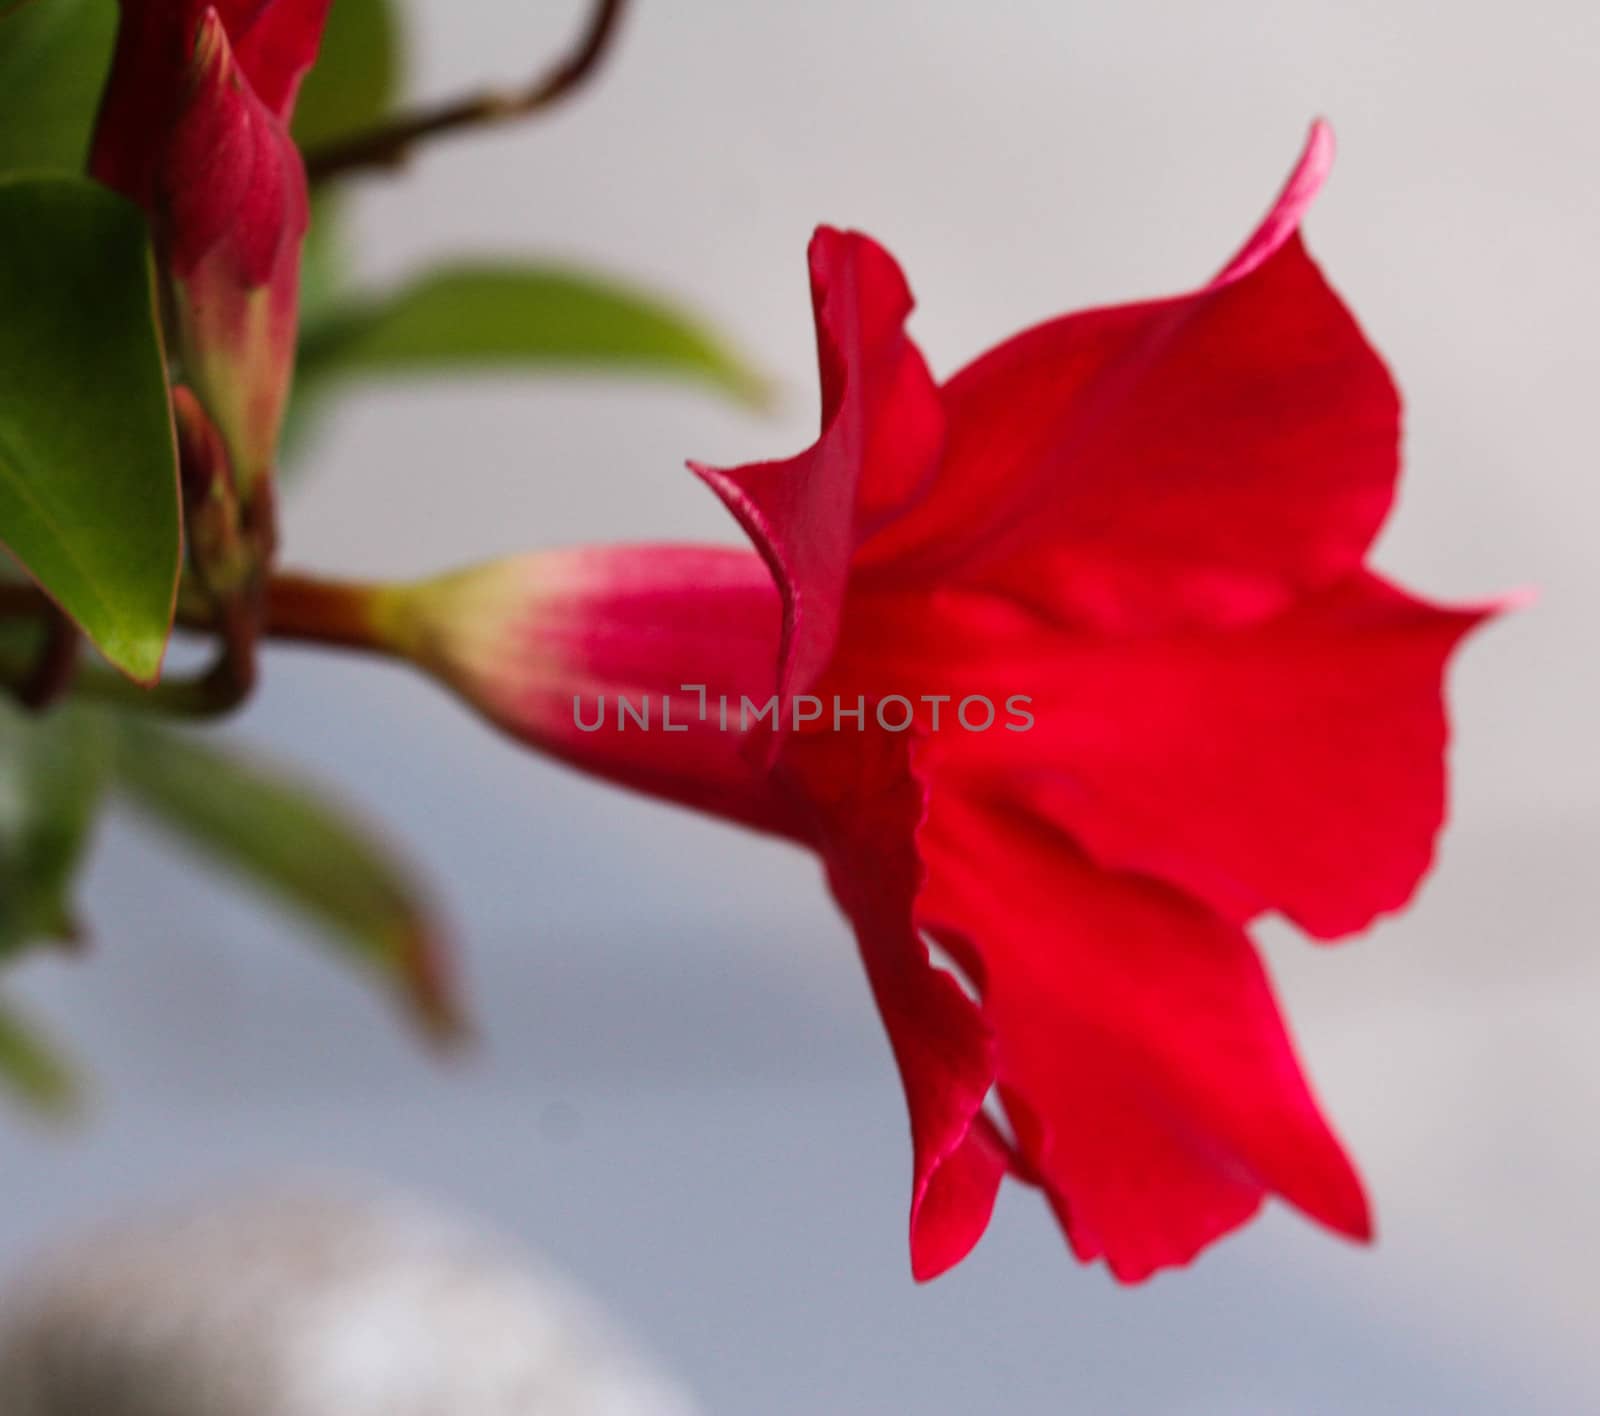 red Mandevilla laxa flower, commonly known as Chilean jasmine plant by michaelmeijer